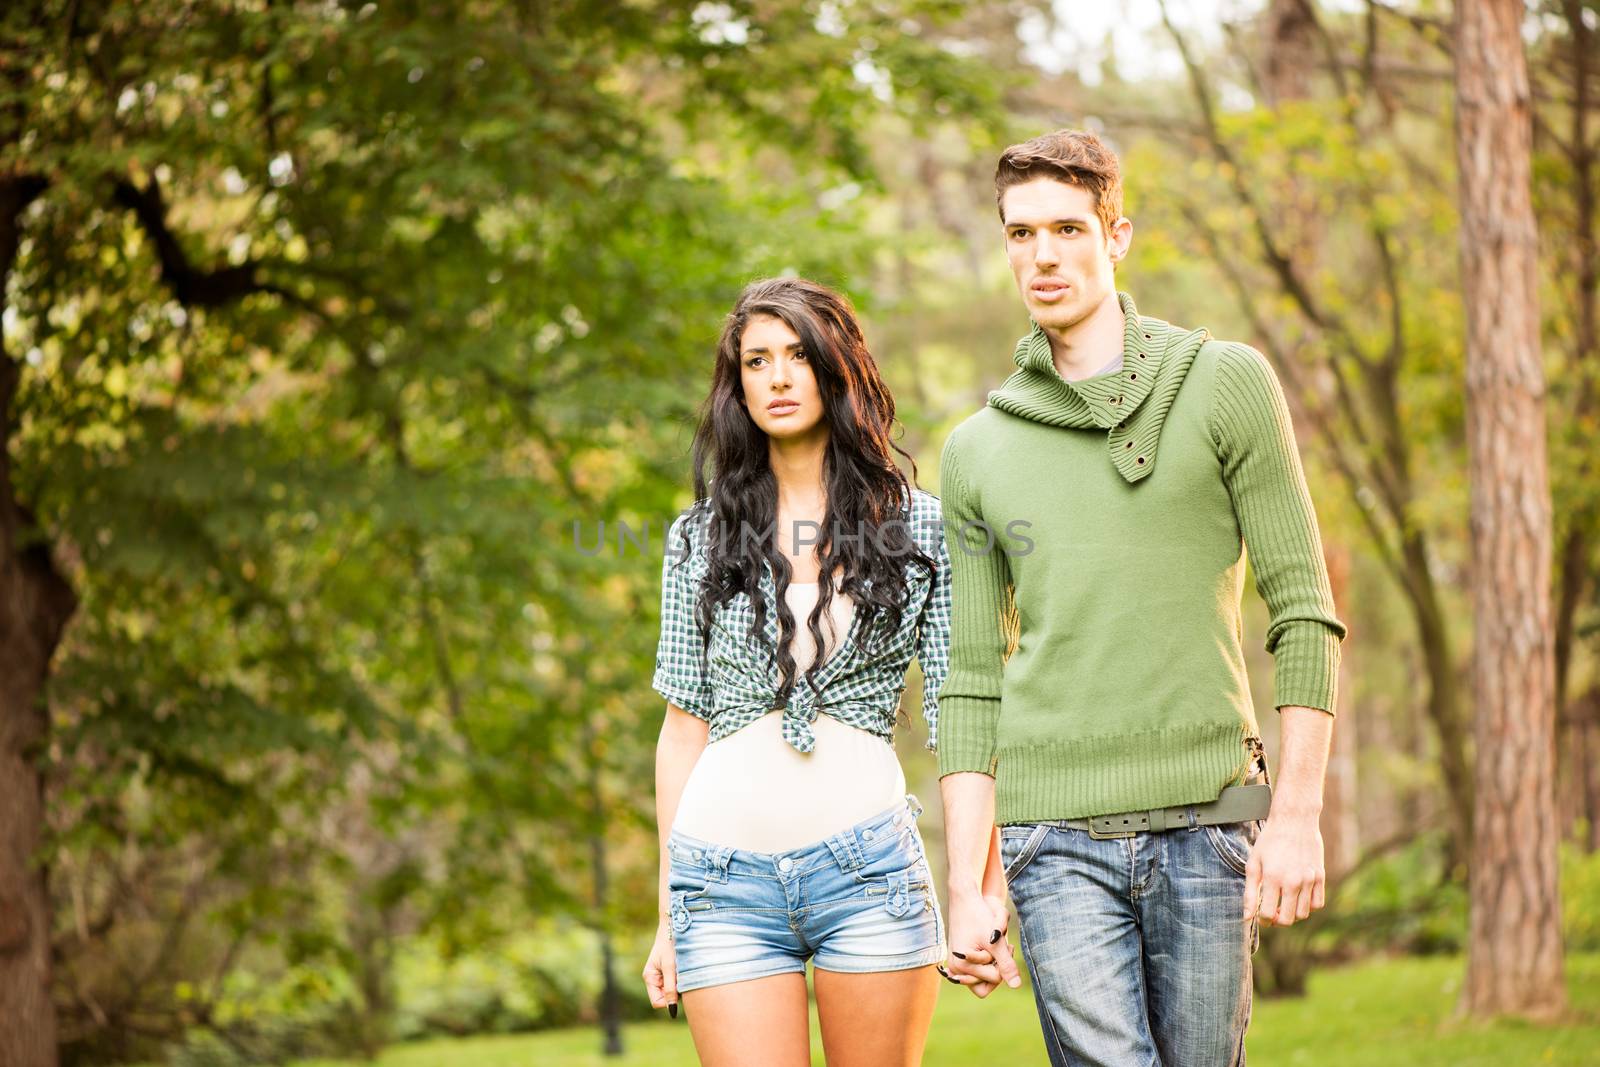 Young handsome heterosexual couple walking through the park holding hands.